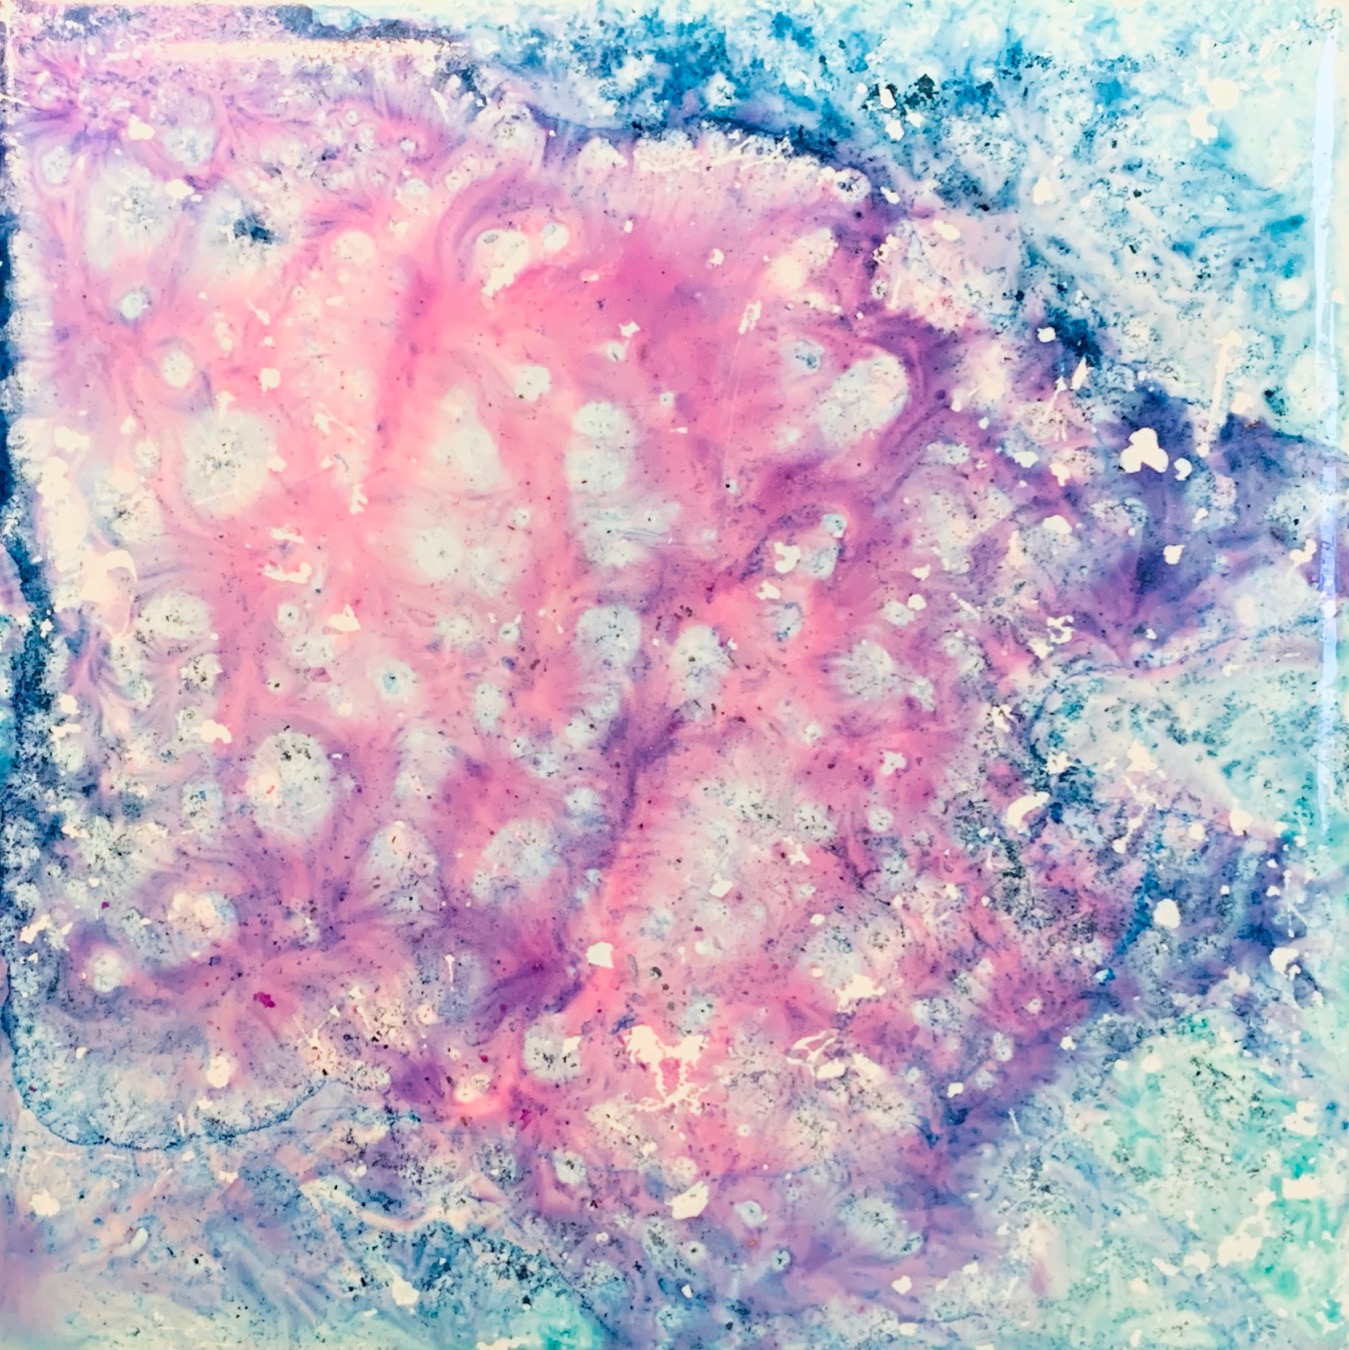 Ceramic tile square decorated with colorful ink